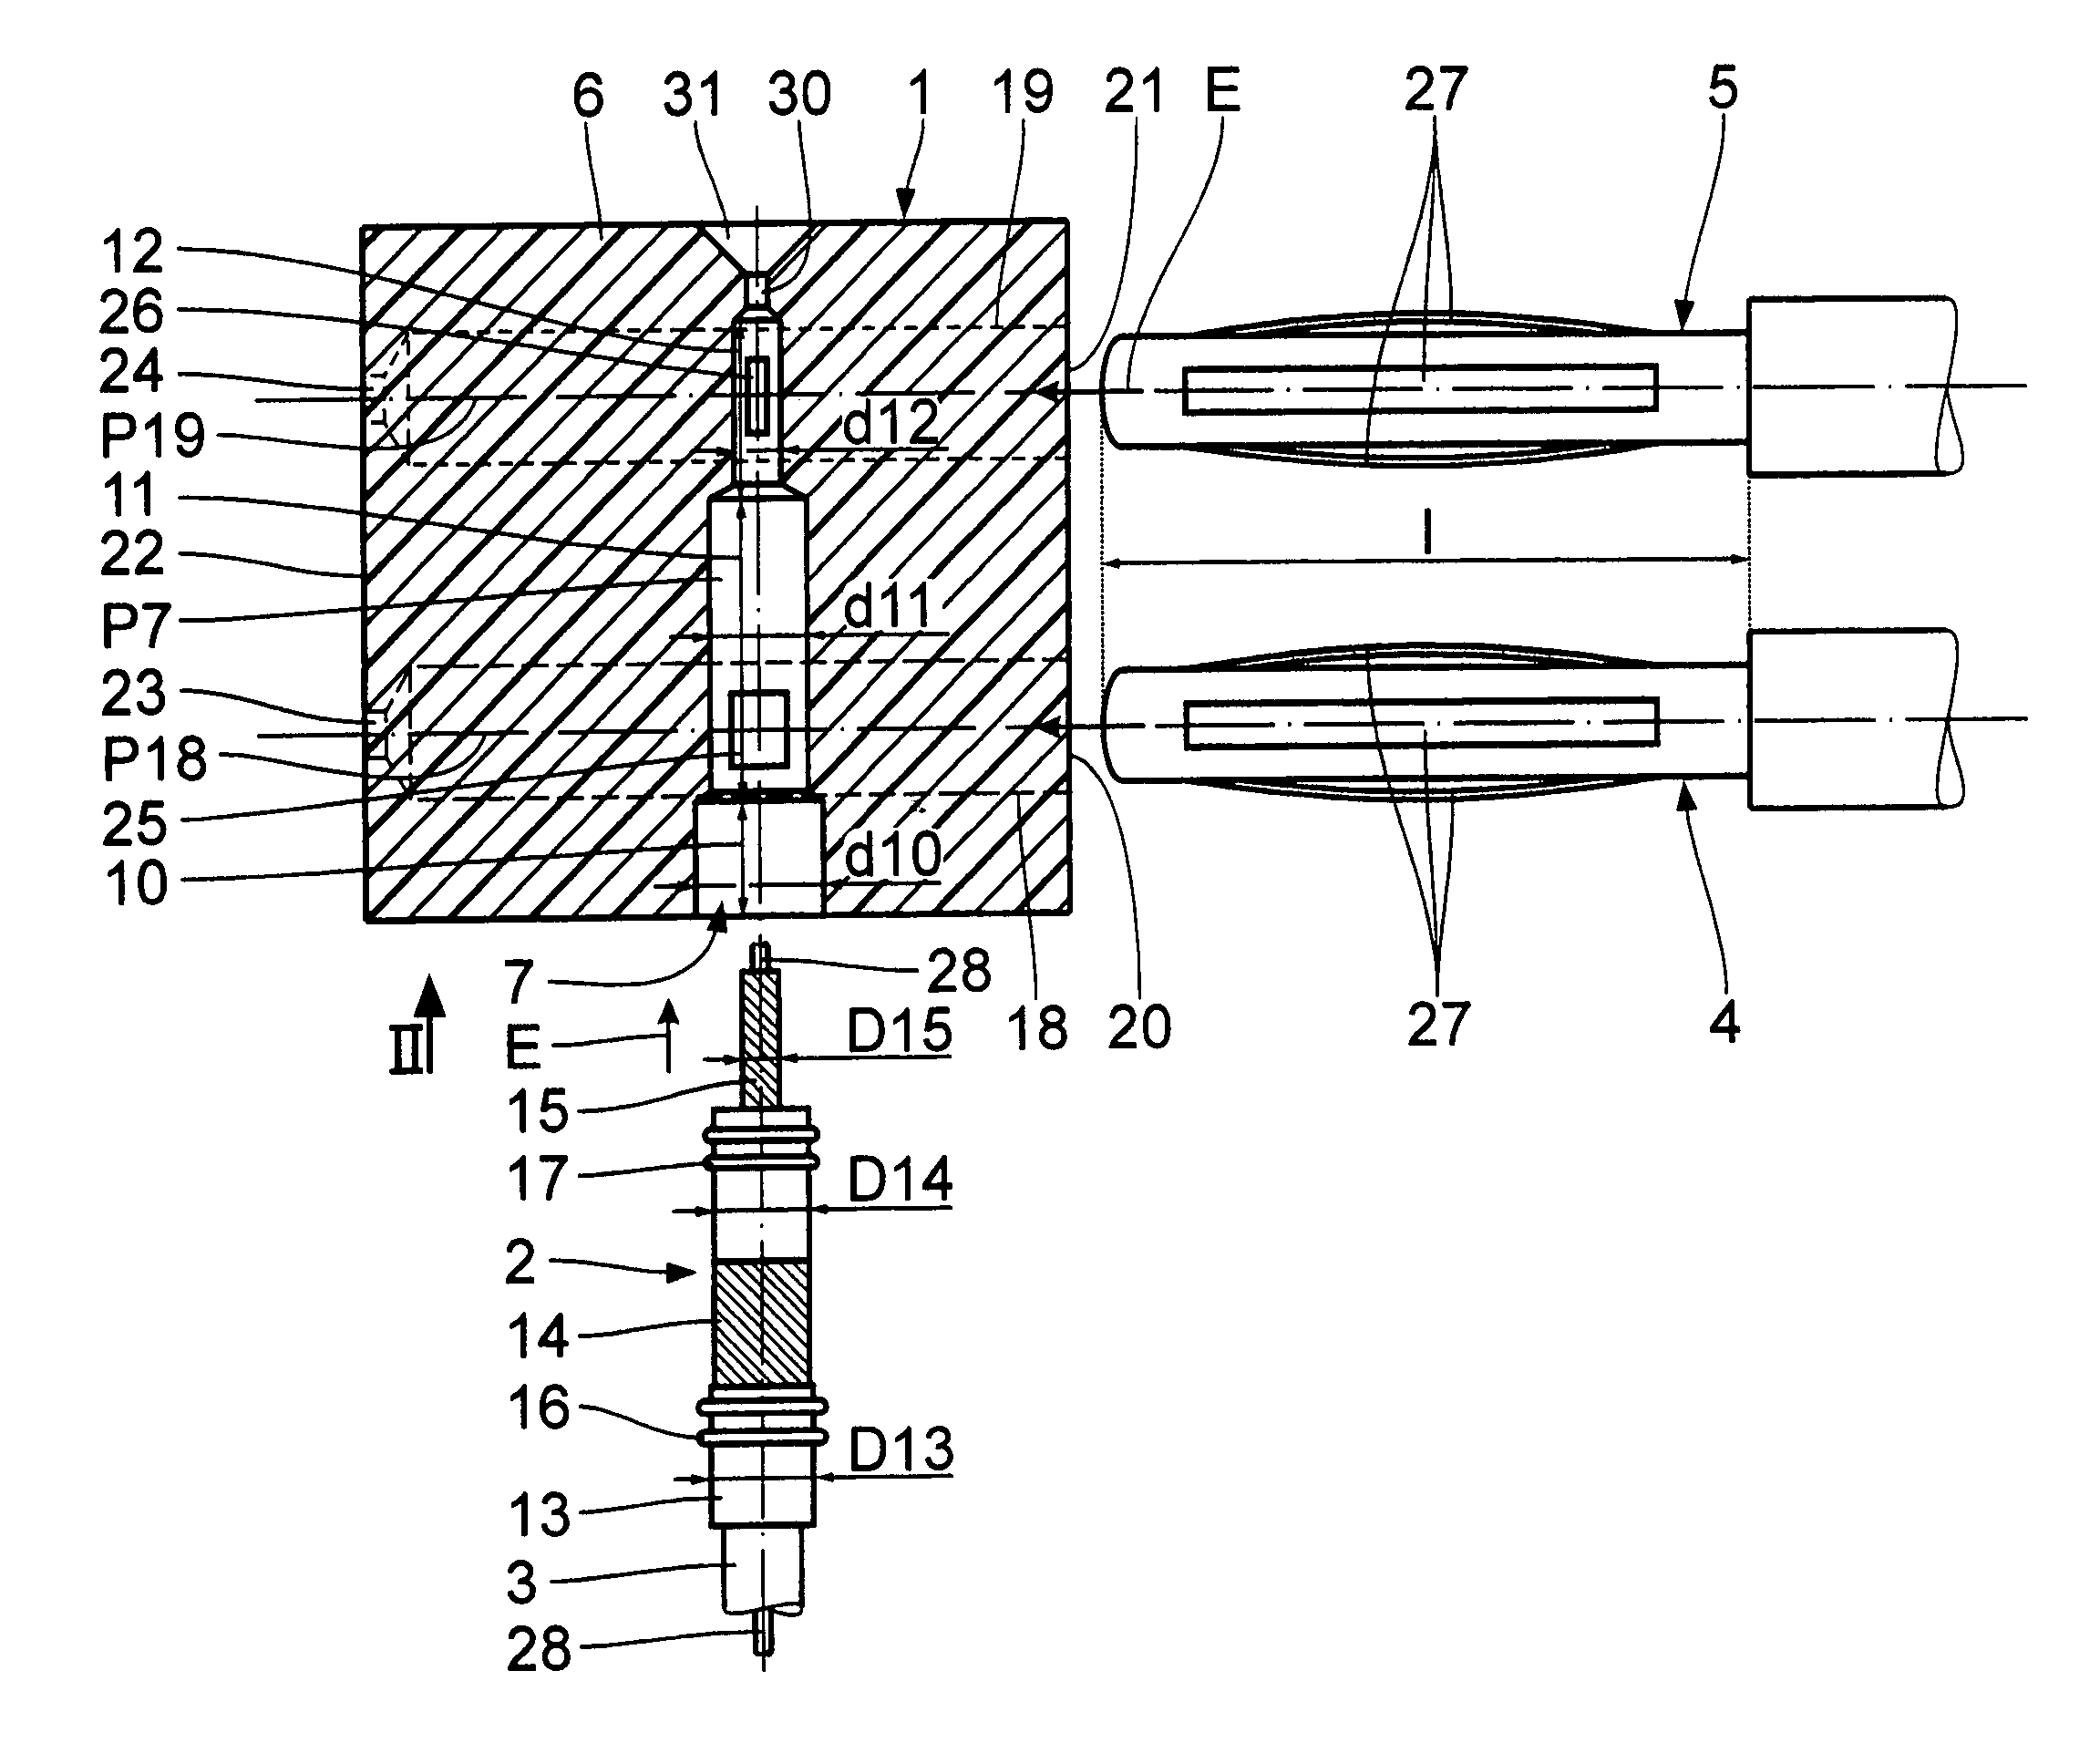 Contact connection adapter for producing an intermittent electrical contact between two plugs